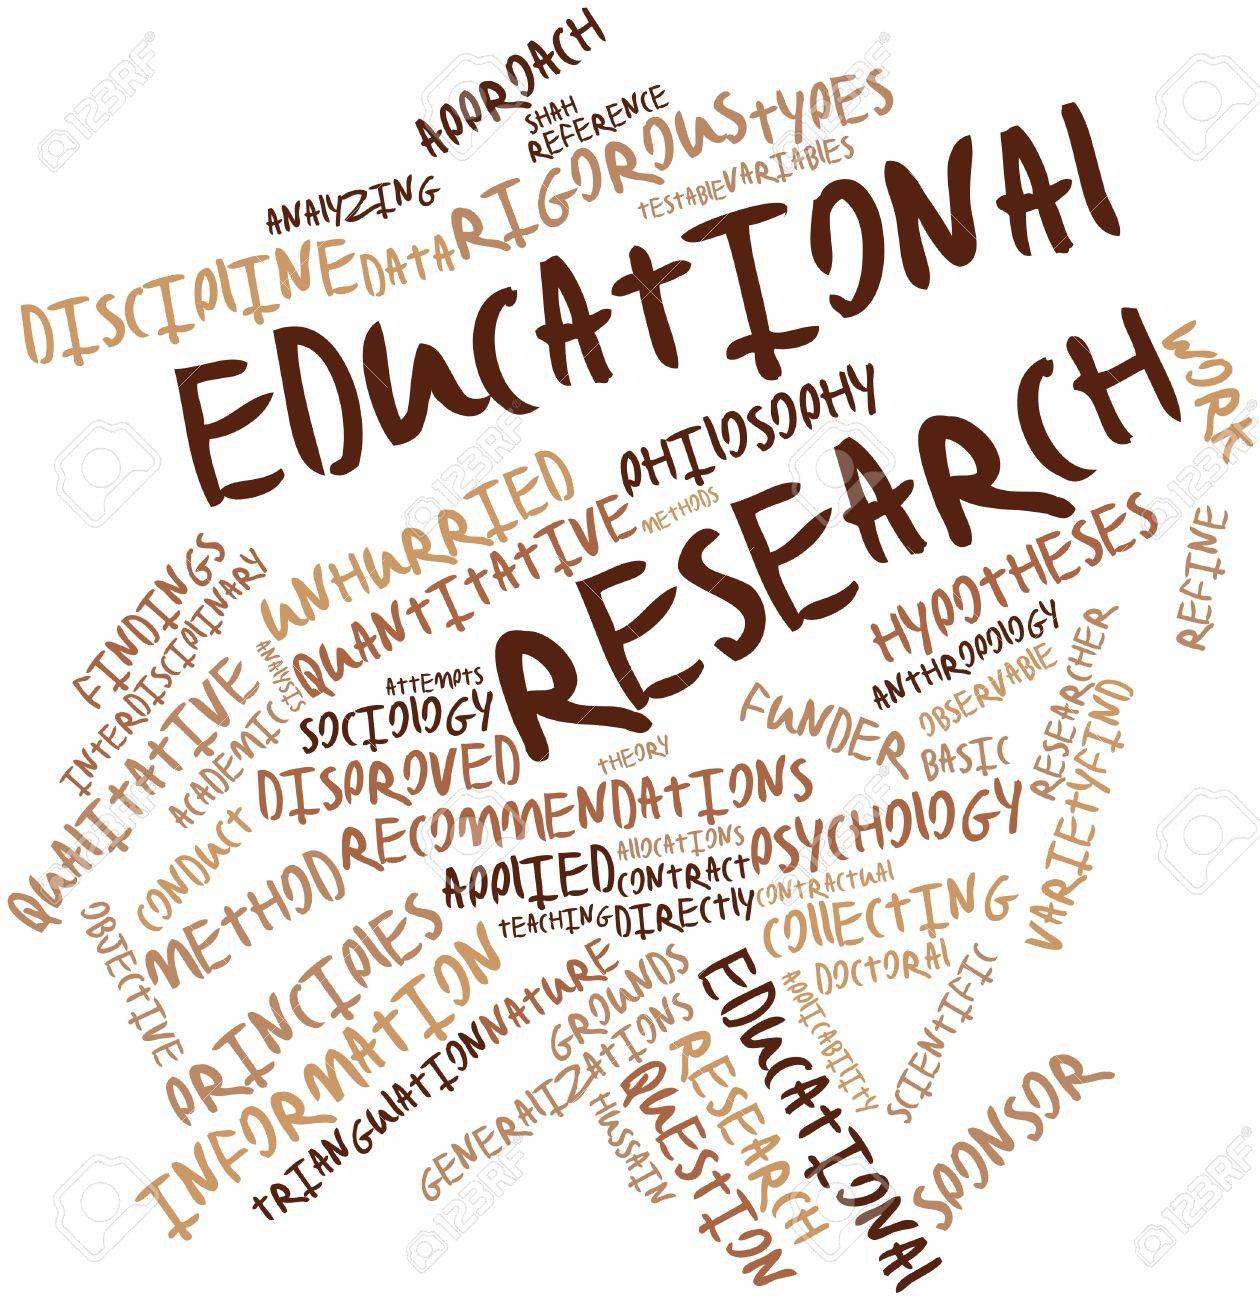 literature of educational research